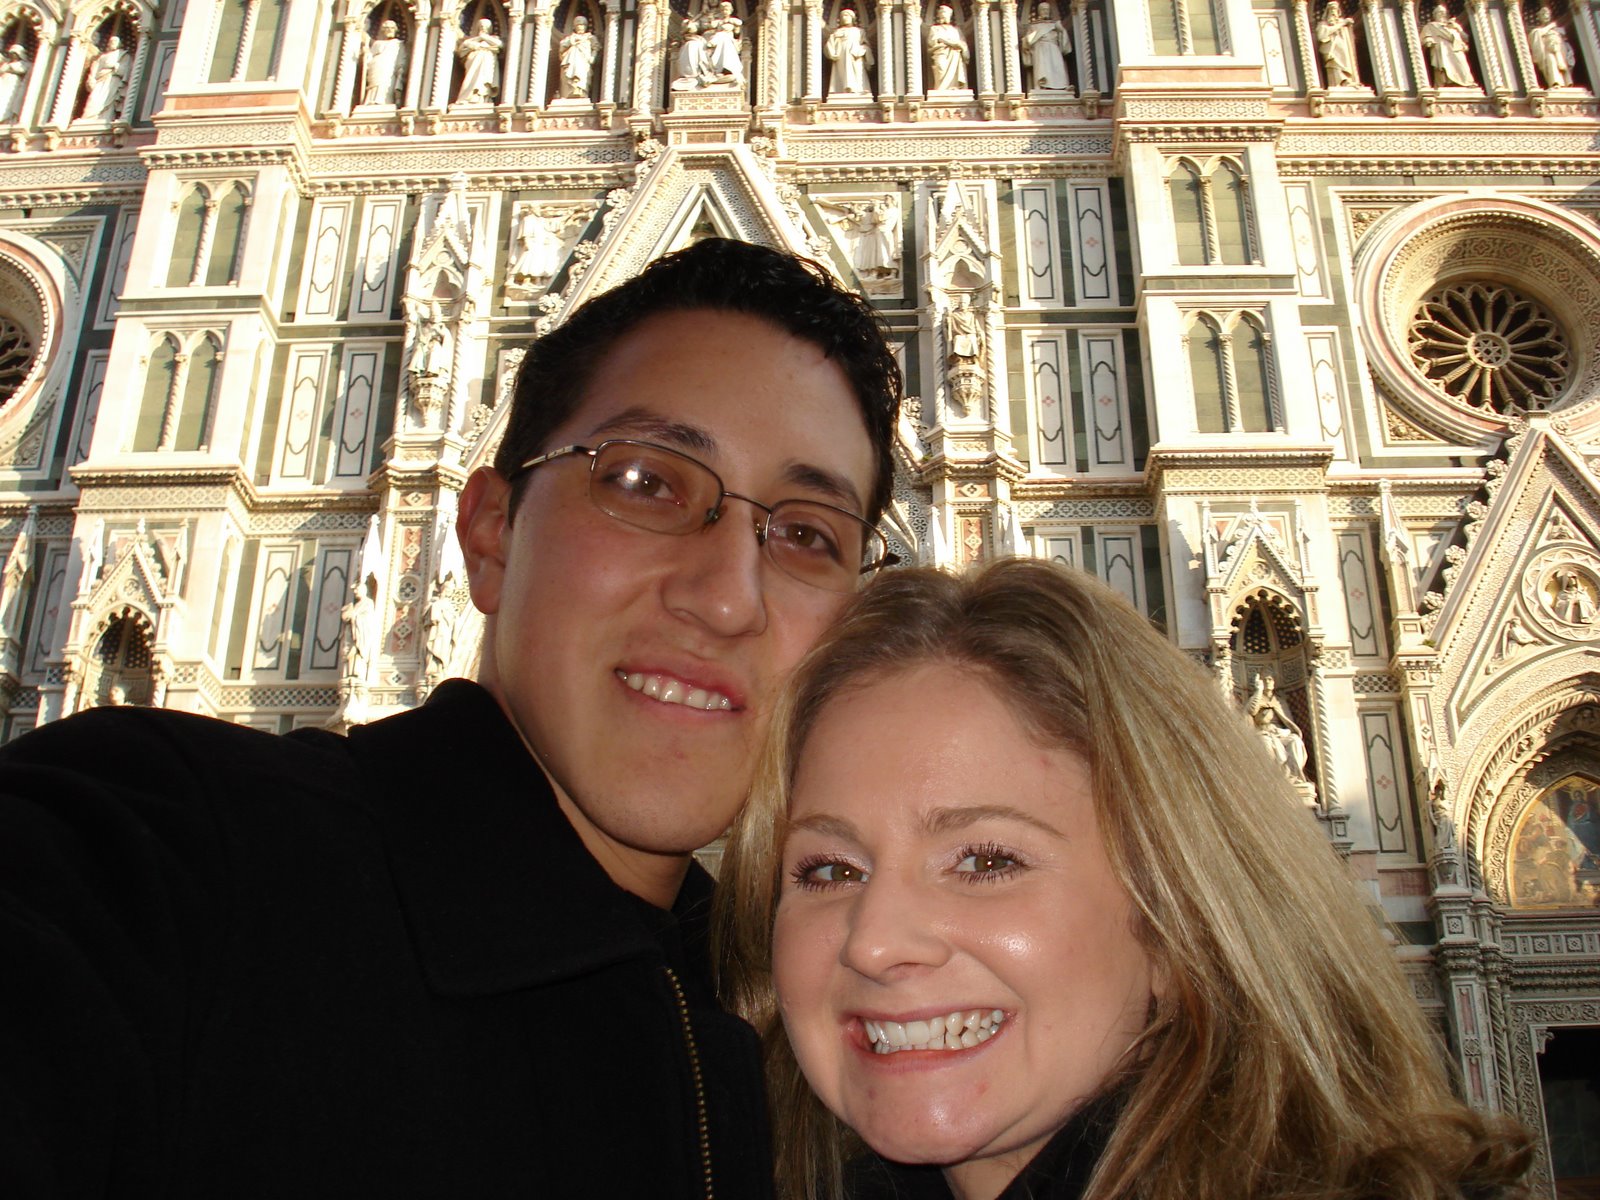 [Jas+and+Muriel+in+front+of+Duomo.jpg]